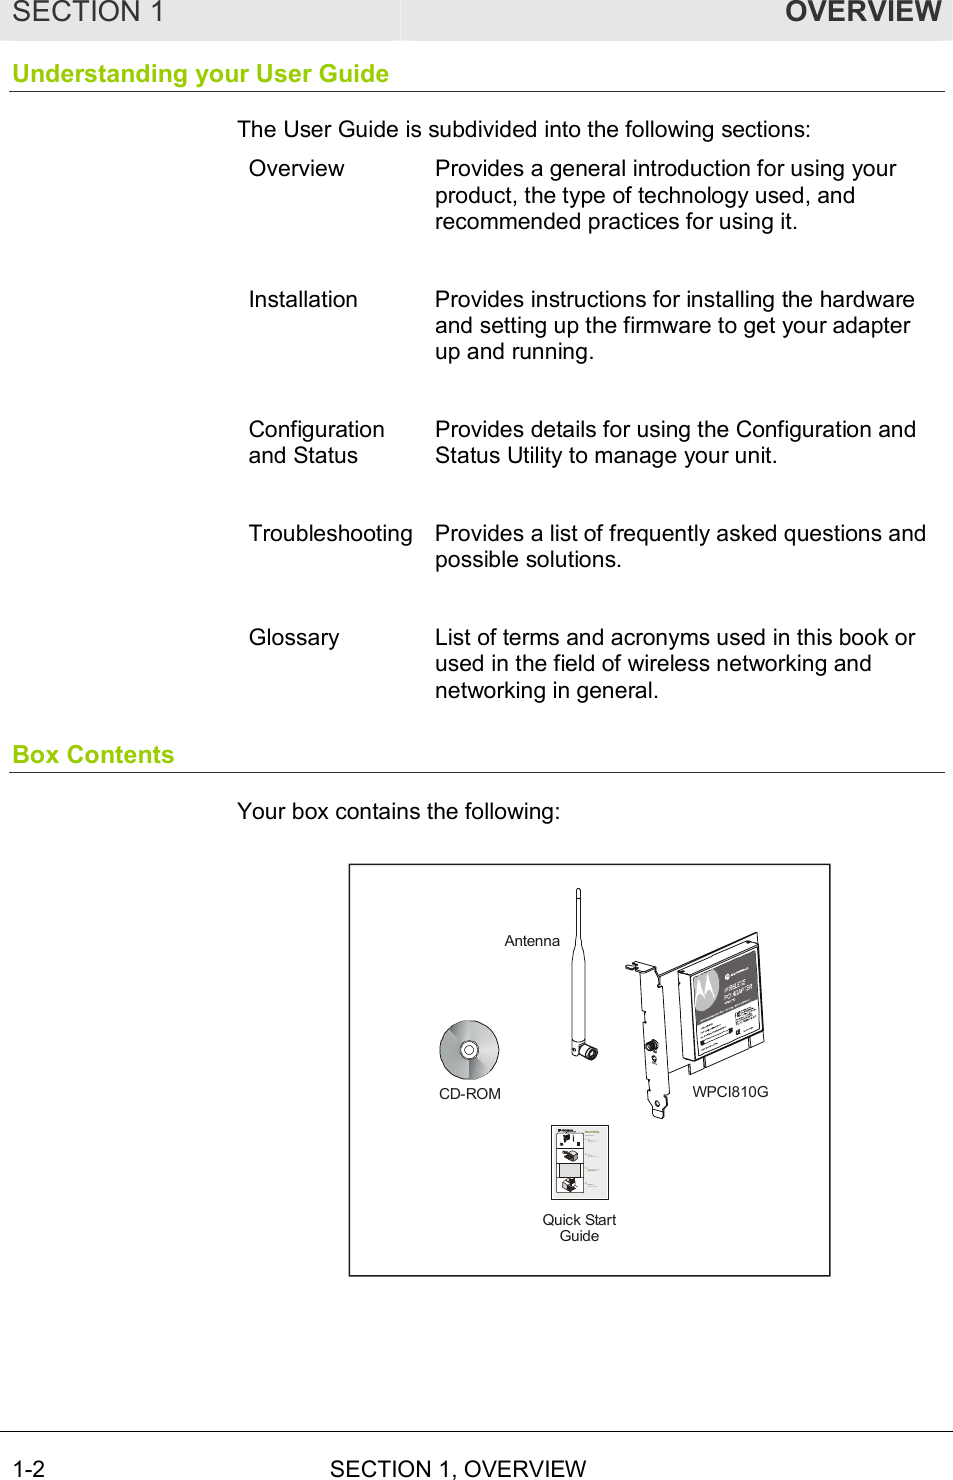 SECTION 1  OVERVIEW 1-2  SECTION 1, OVERVIEW  Understanding your User Guide The User Guide is subdivided into the following sections: Overview  Provides a general introduction for using your product, the type of technology used, and recommended practices for using it.  Installation  Provides instructions for installing the hardware and setting up the firmware to get your adapter up and running.  Configuration and Status Provides details for using the Configuration and Status Utility to manage your unit.  Troubleshooting Provides a list of frequently asked questions and possible solutions.  Glossary  List of terms and acronyms used in this book or used in the field of wireless networking and networking in general. Box Contents Your box contains the following: WPCI810GCD-ROMQuick StartGuideAntennaGe t t ing Sta rted1234Mot oro la  WPCI810G Wireless PCI Adapter Checkthat your box contains these items.  (User Guide: Section 1)Insertthe Installation Assistant CD-ROM(User Guide: Section 2)Installthe software for your unit from the CD-ROM(User Guide: Section 2)Insert your card into the PC(User Guide: Section 2)CD-ROMWPCI810GWPCI AntennaQuick StartGuide 